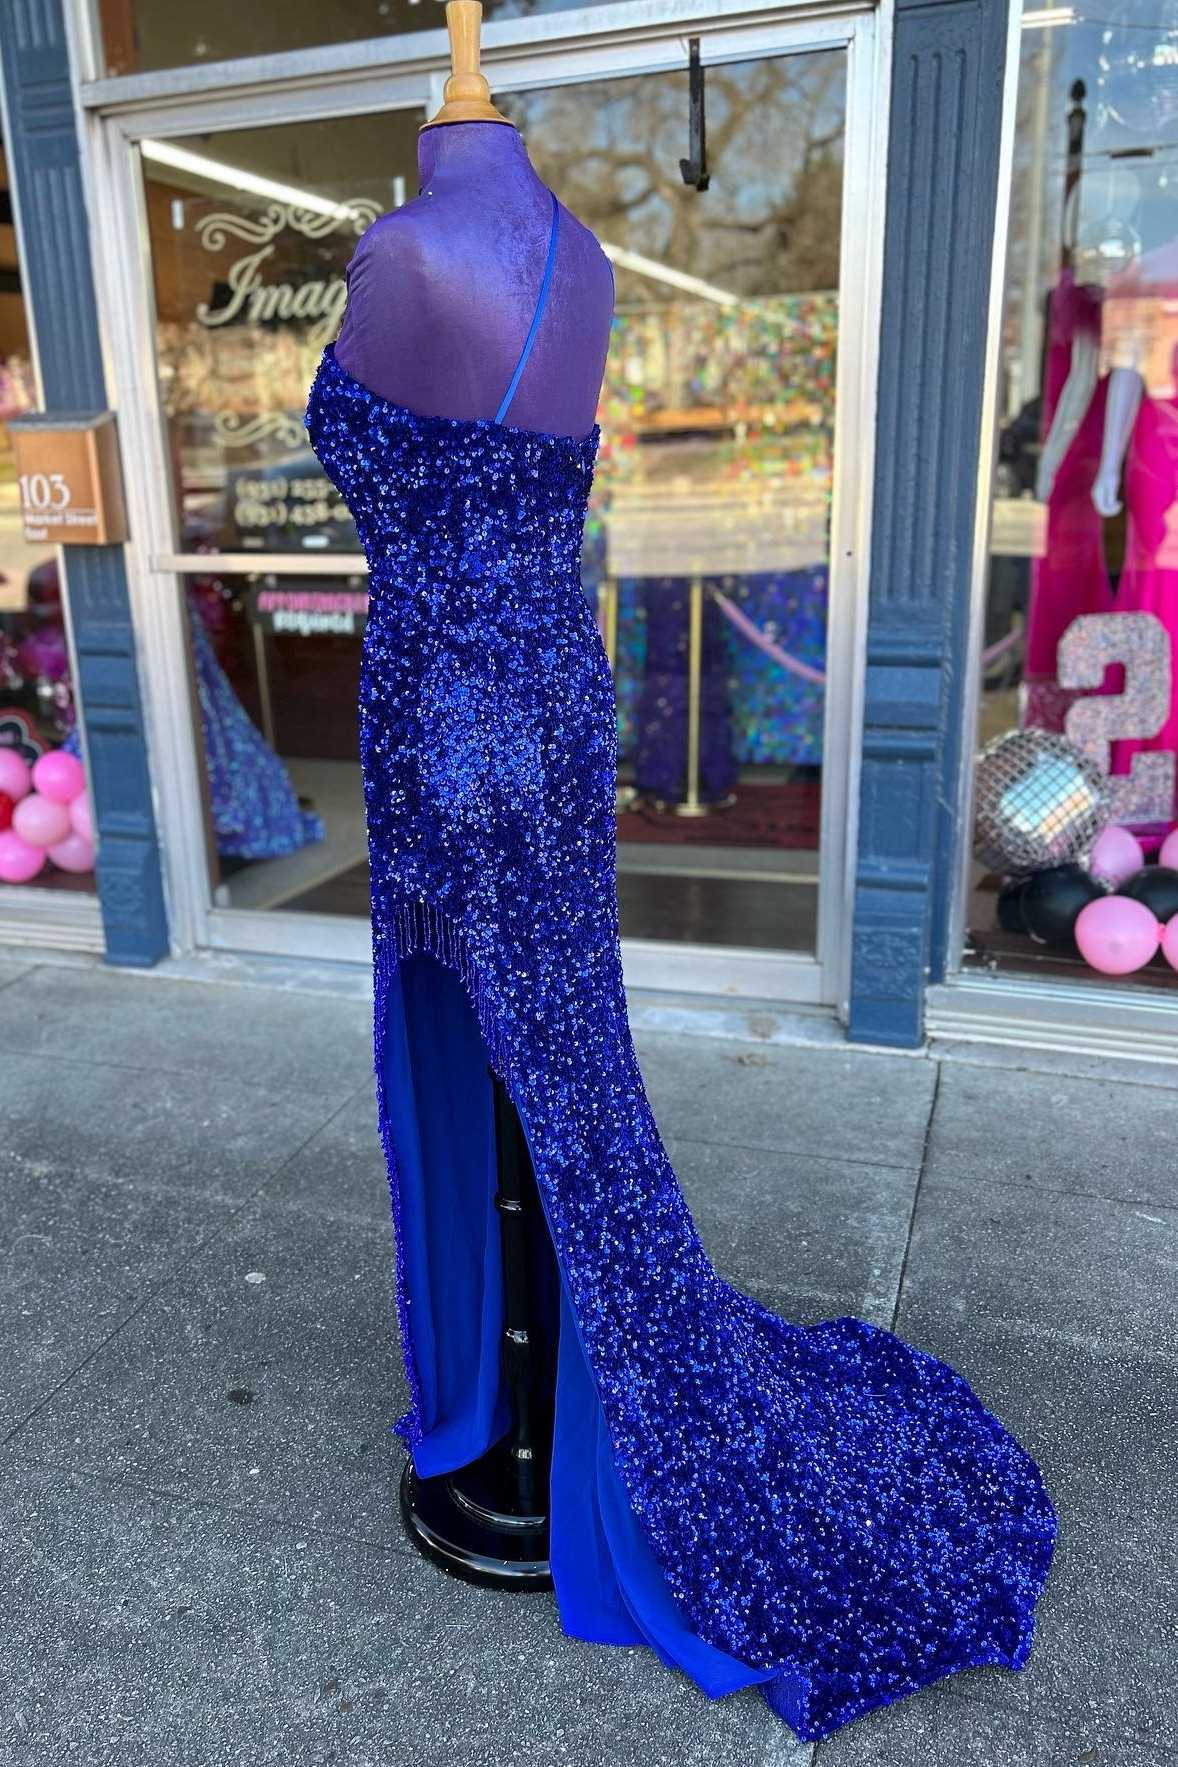 Bridesmaid Dress Beach Wedding, Royal Blue Sequin One-Shoulder Backless Long Prom Dresses with Slit,Evening Party Dress